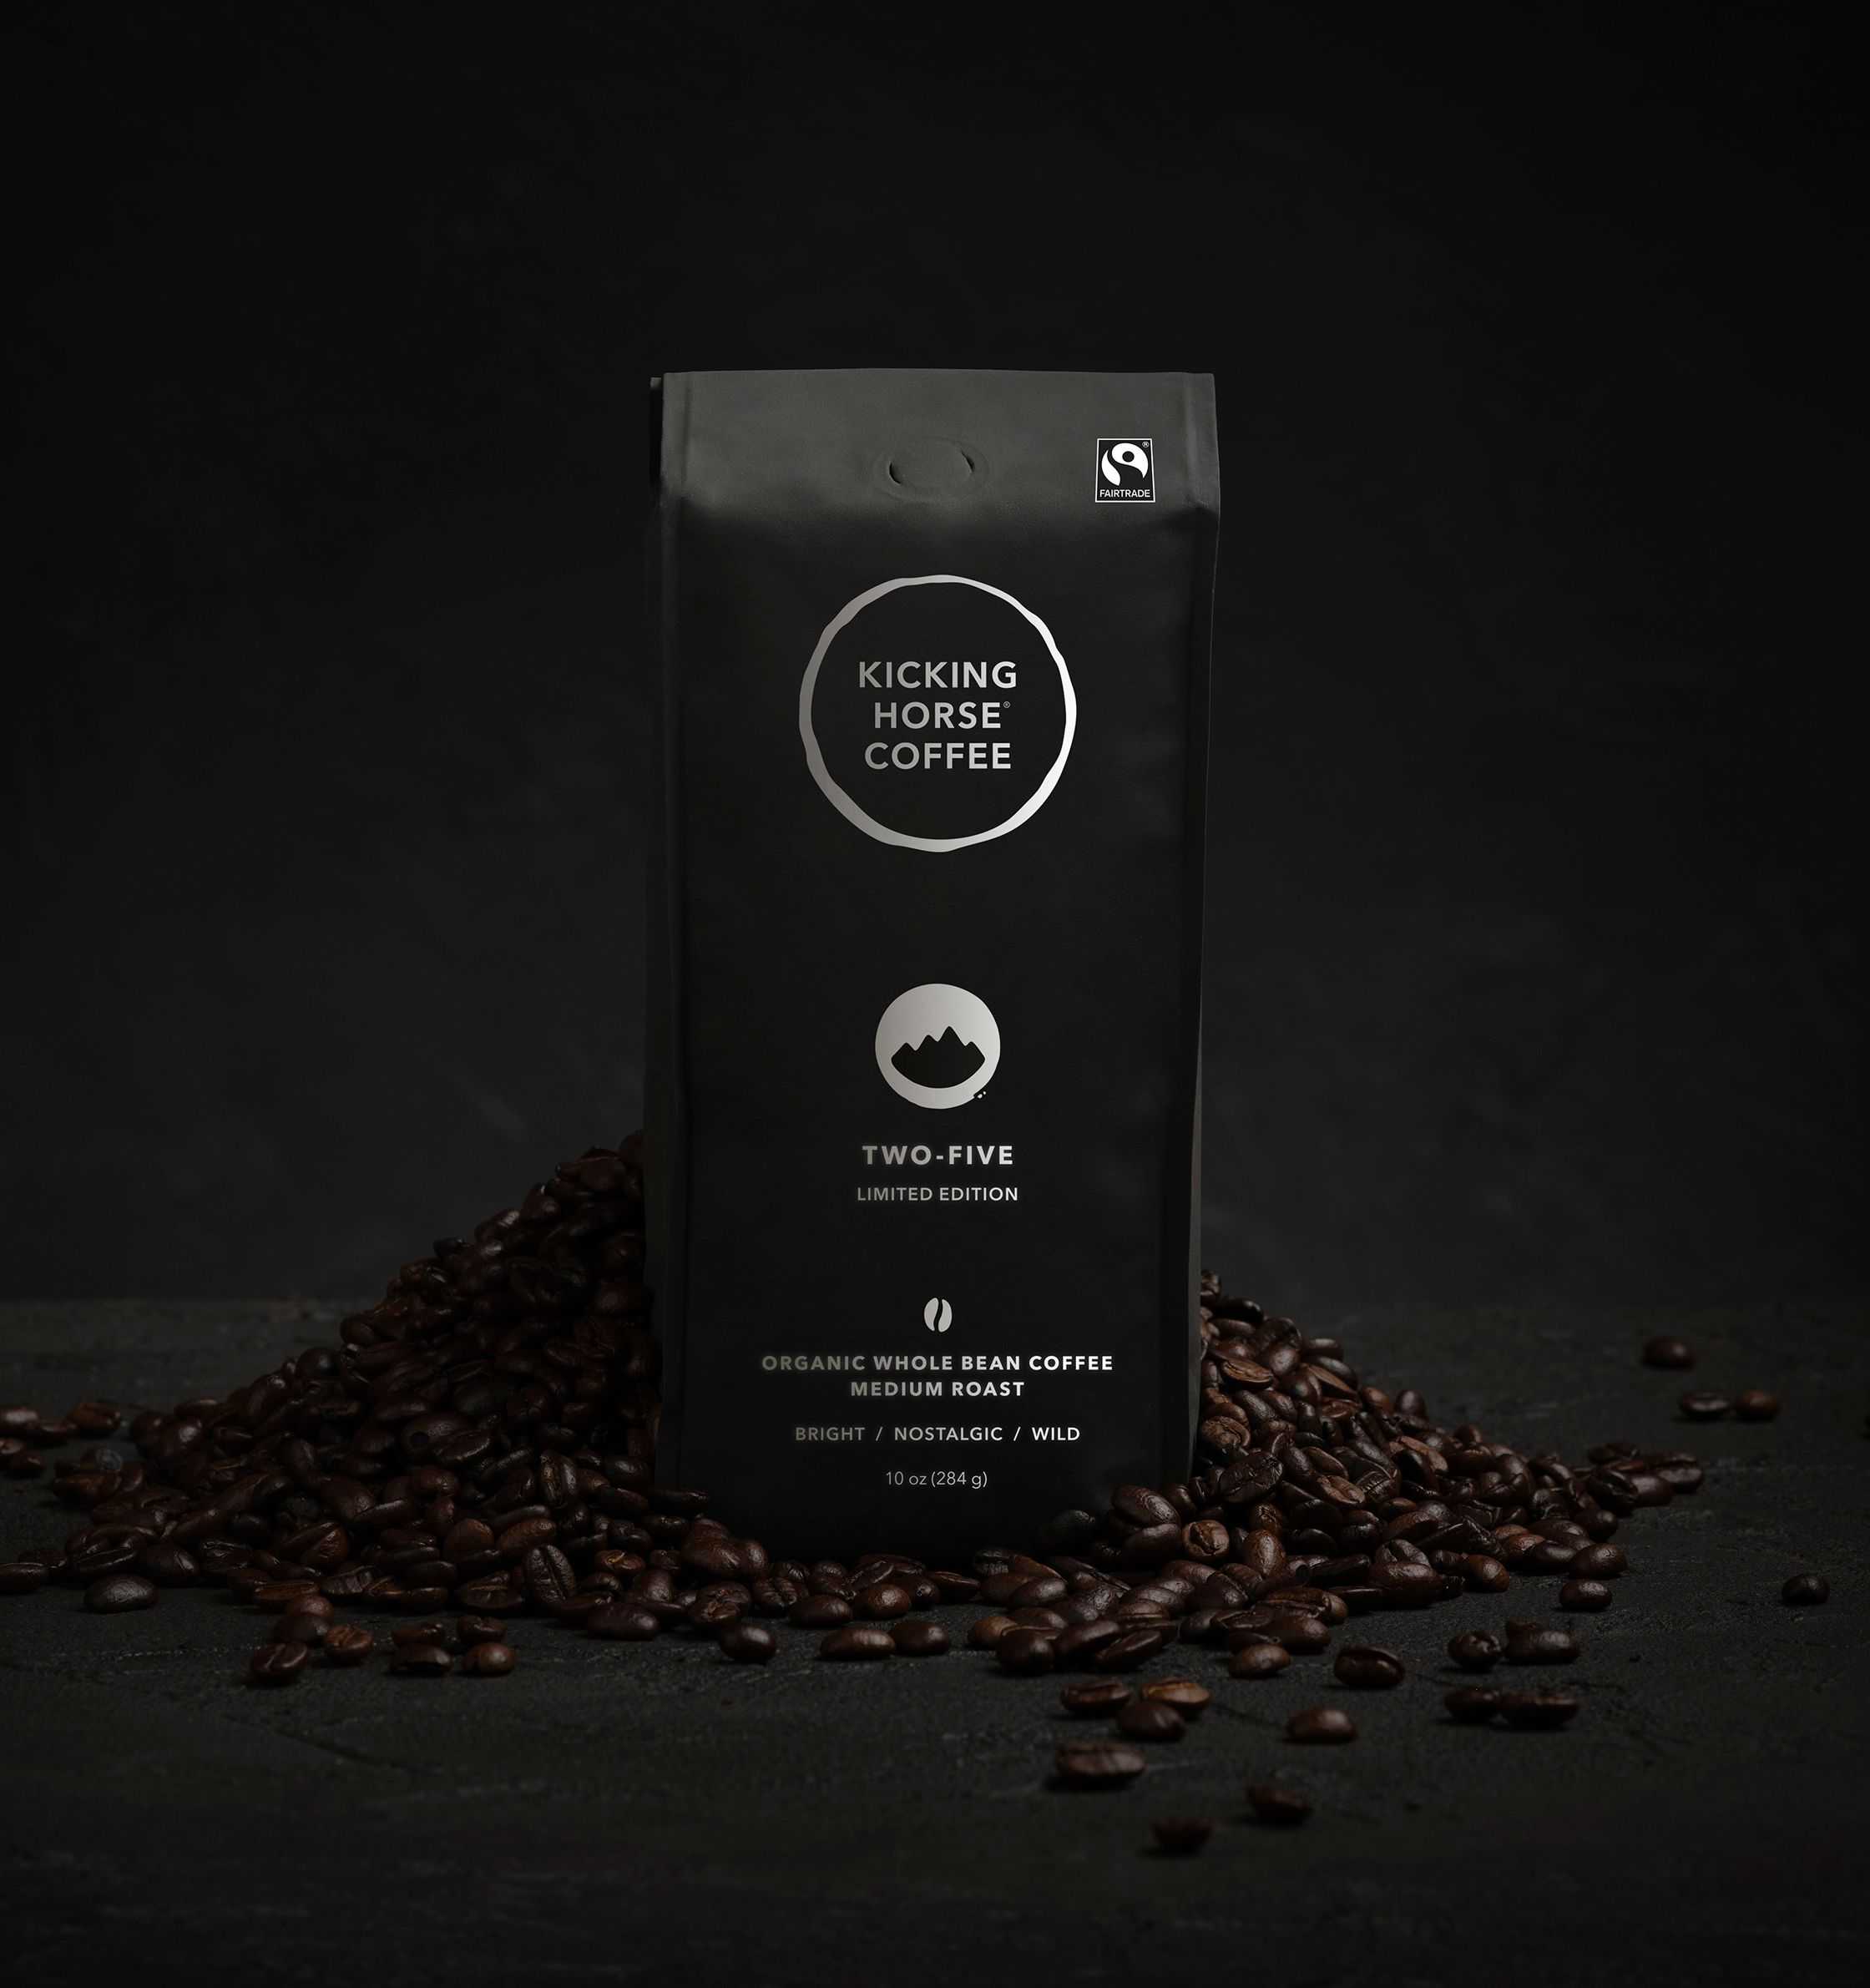 Bag of Kicking horse coffee limited edition: Two Five